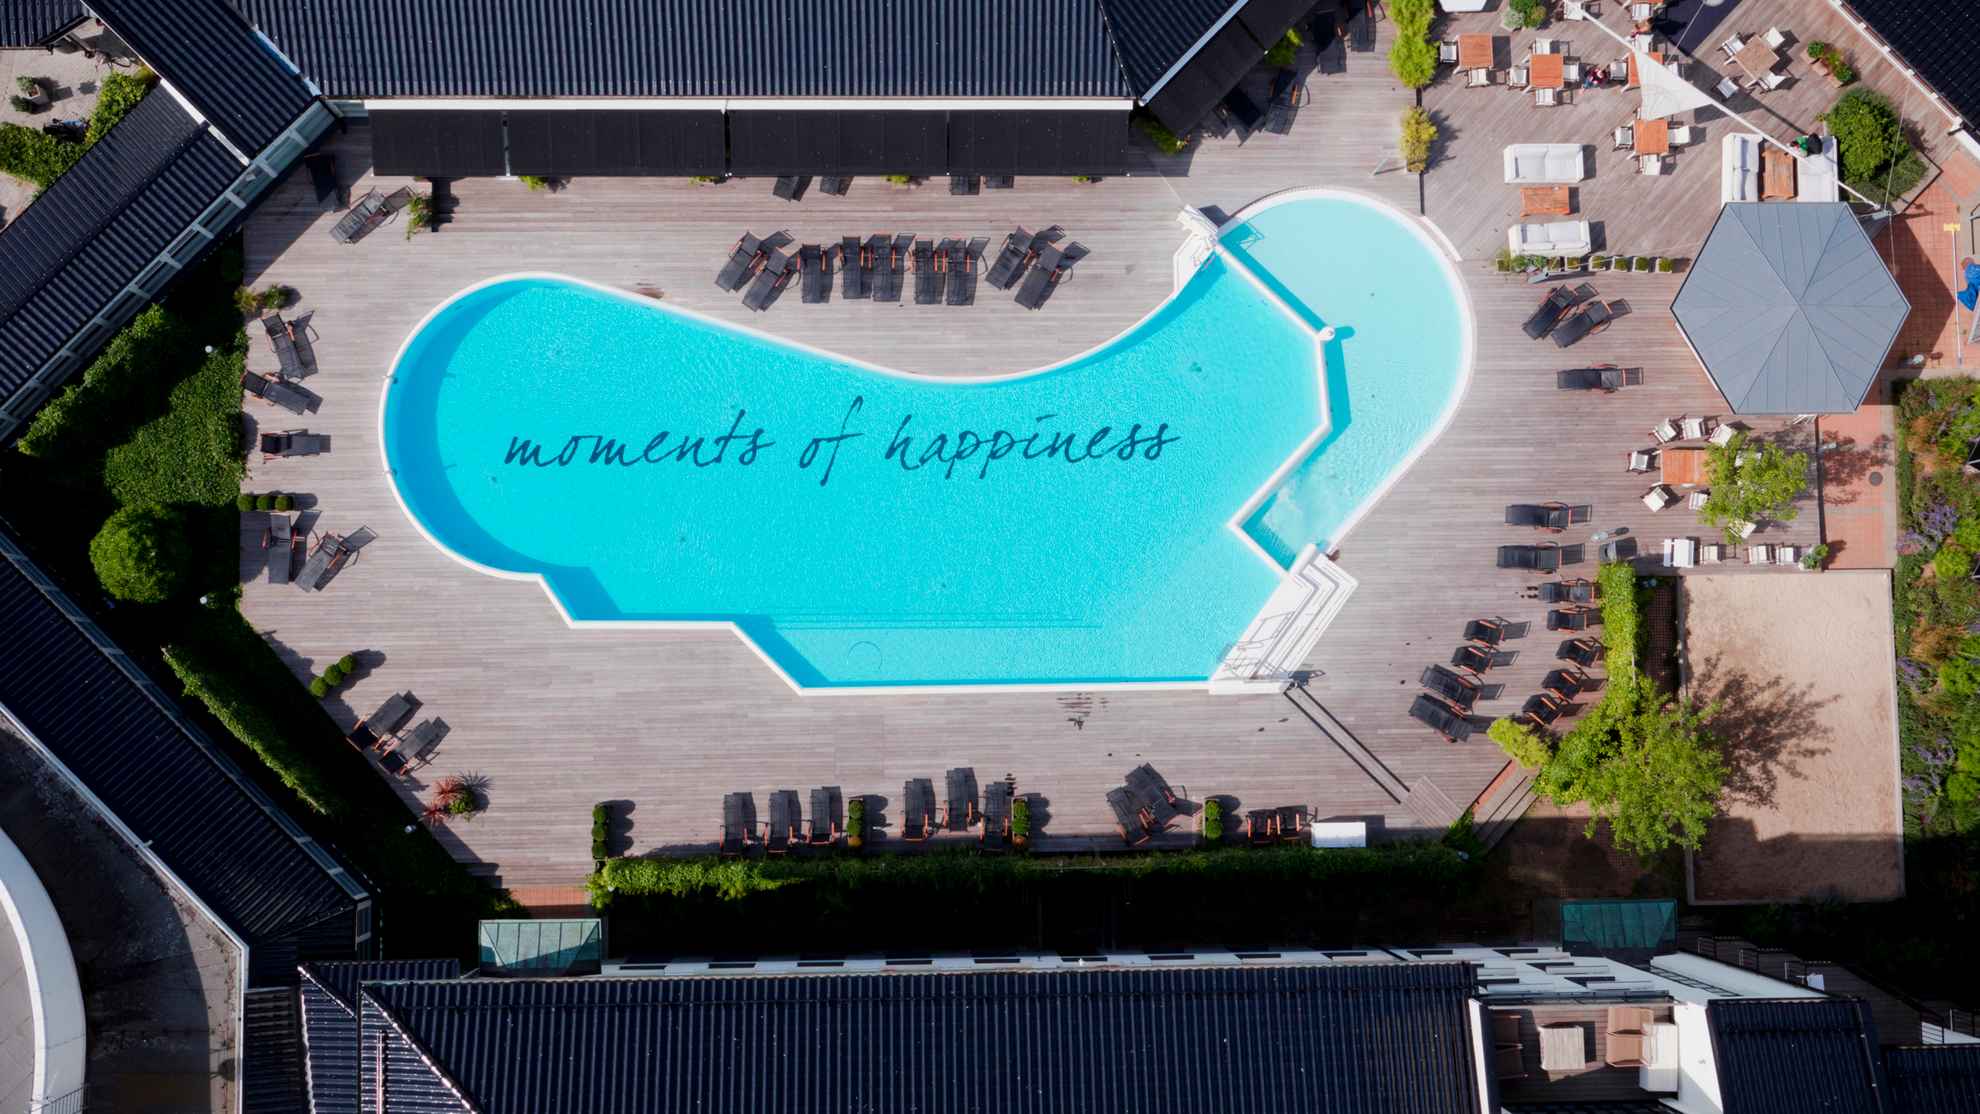 Outdoor pool with the inscription 'moments of happiness' at the bottom, surrounded by a wooden deck and sunbeds.